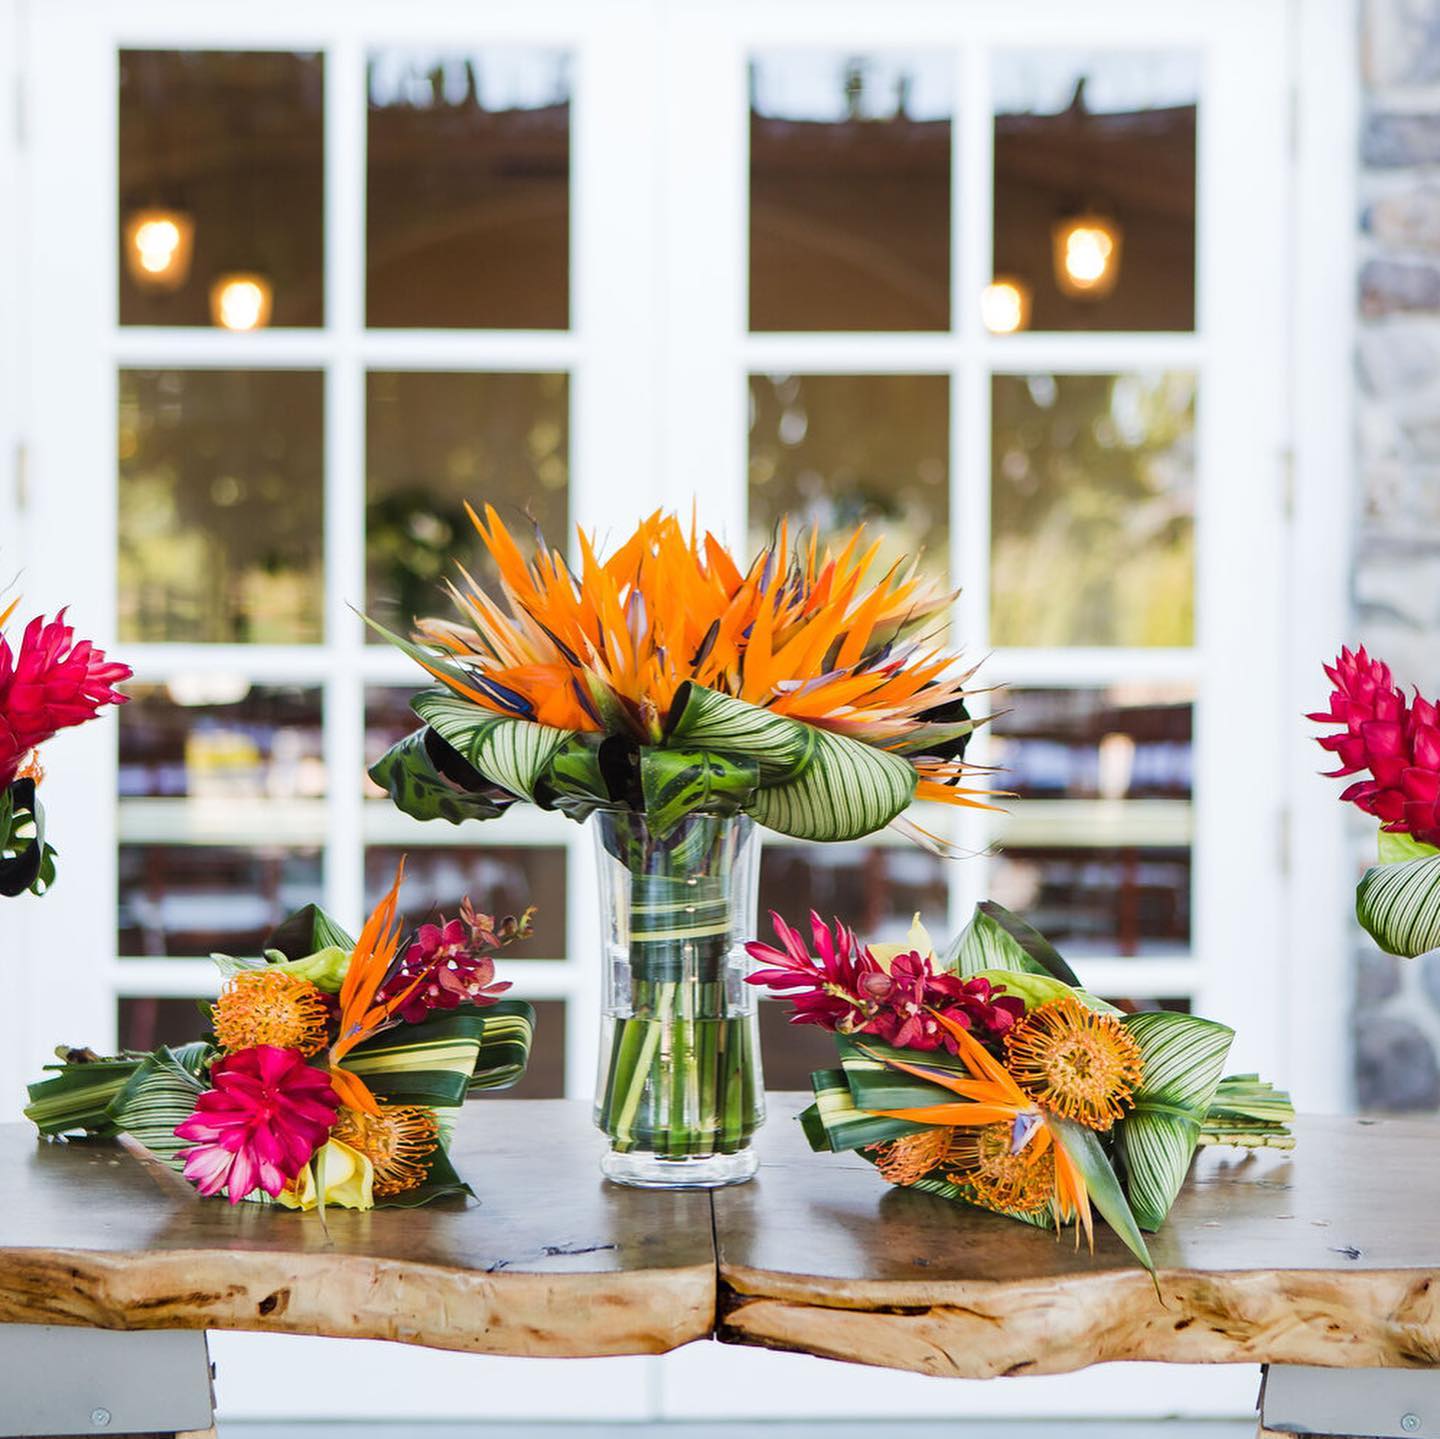 Bouquets with Strelitzia Flowers